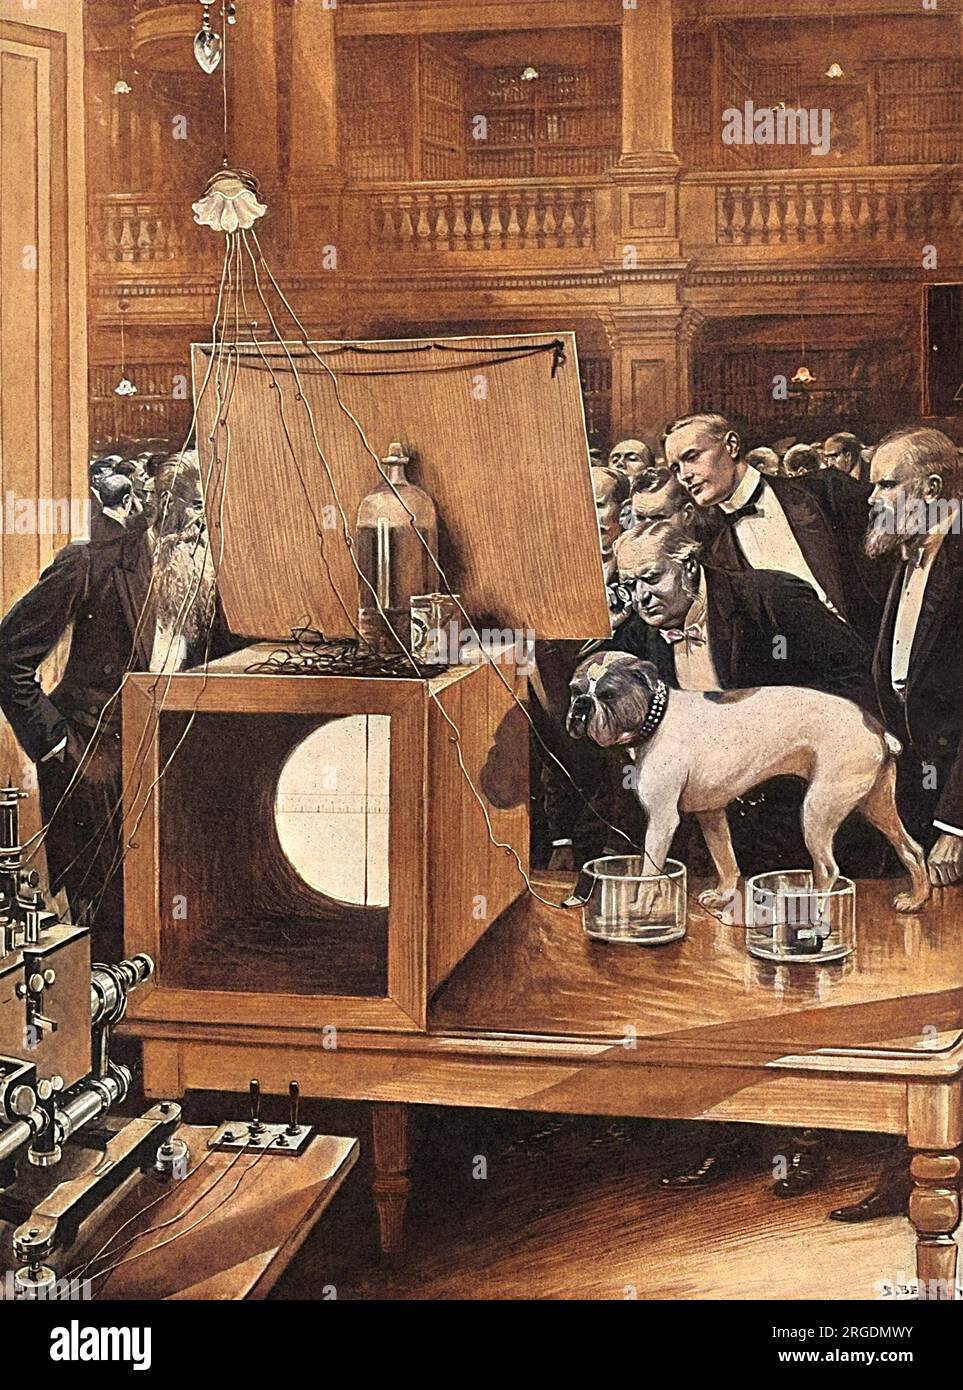 Jimmy, a Bulldog owned by Dr A.D.Waller, takes part in an experiment at the Royal Society, Burlington House, London. With one fore-leg and one hind-leg in separate pots of salt solution connected to Einthoven's string galvanometer, his heart-beat is recorded on a lime-lit sheet, a thread vibrating with each heart-beat. Several ladies in the audience also took part in the experiment, dipping their hands into the saline solution pots, and their hearts were found to be steadier than Jimmy's. Stock Photo